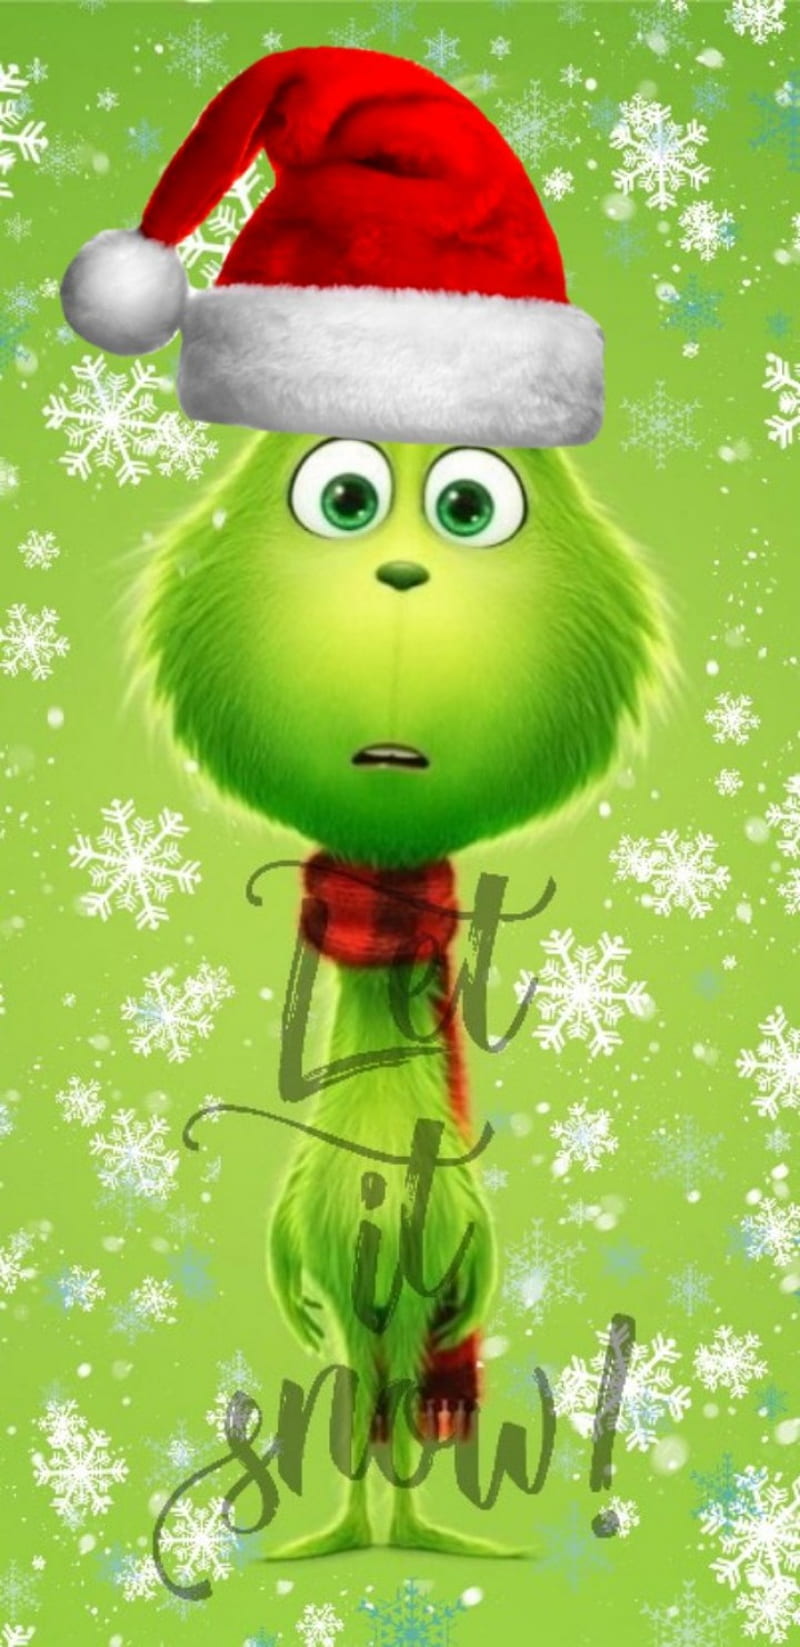 Grinch In Santa Dress Dr Seuss How the Grinch Stole Christmas The  Musical HD The Grinch Wallpapers  HD Wallpapers  ID 51366